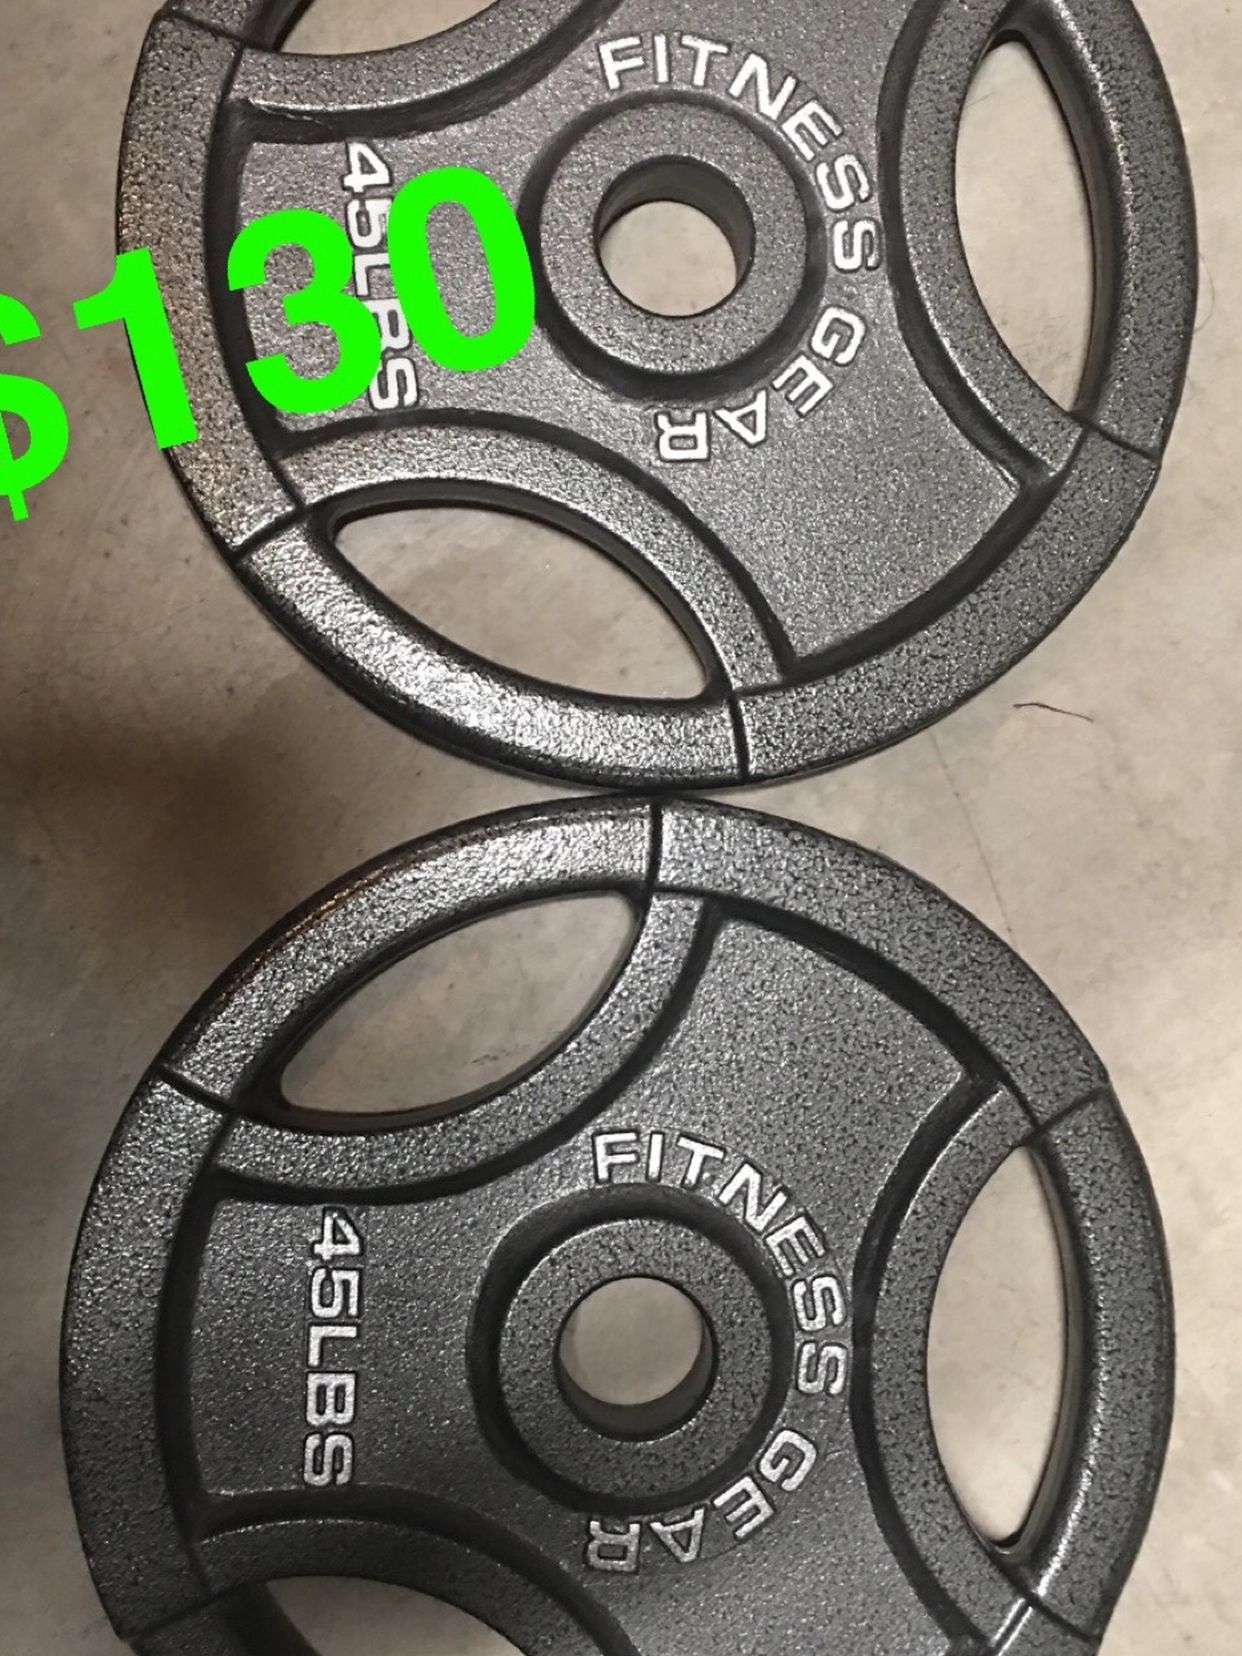 45 Lb Weight Plates